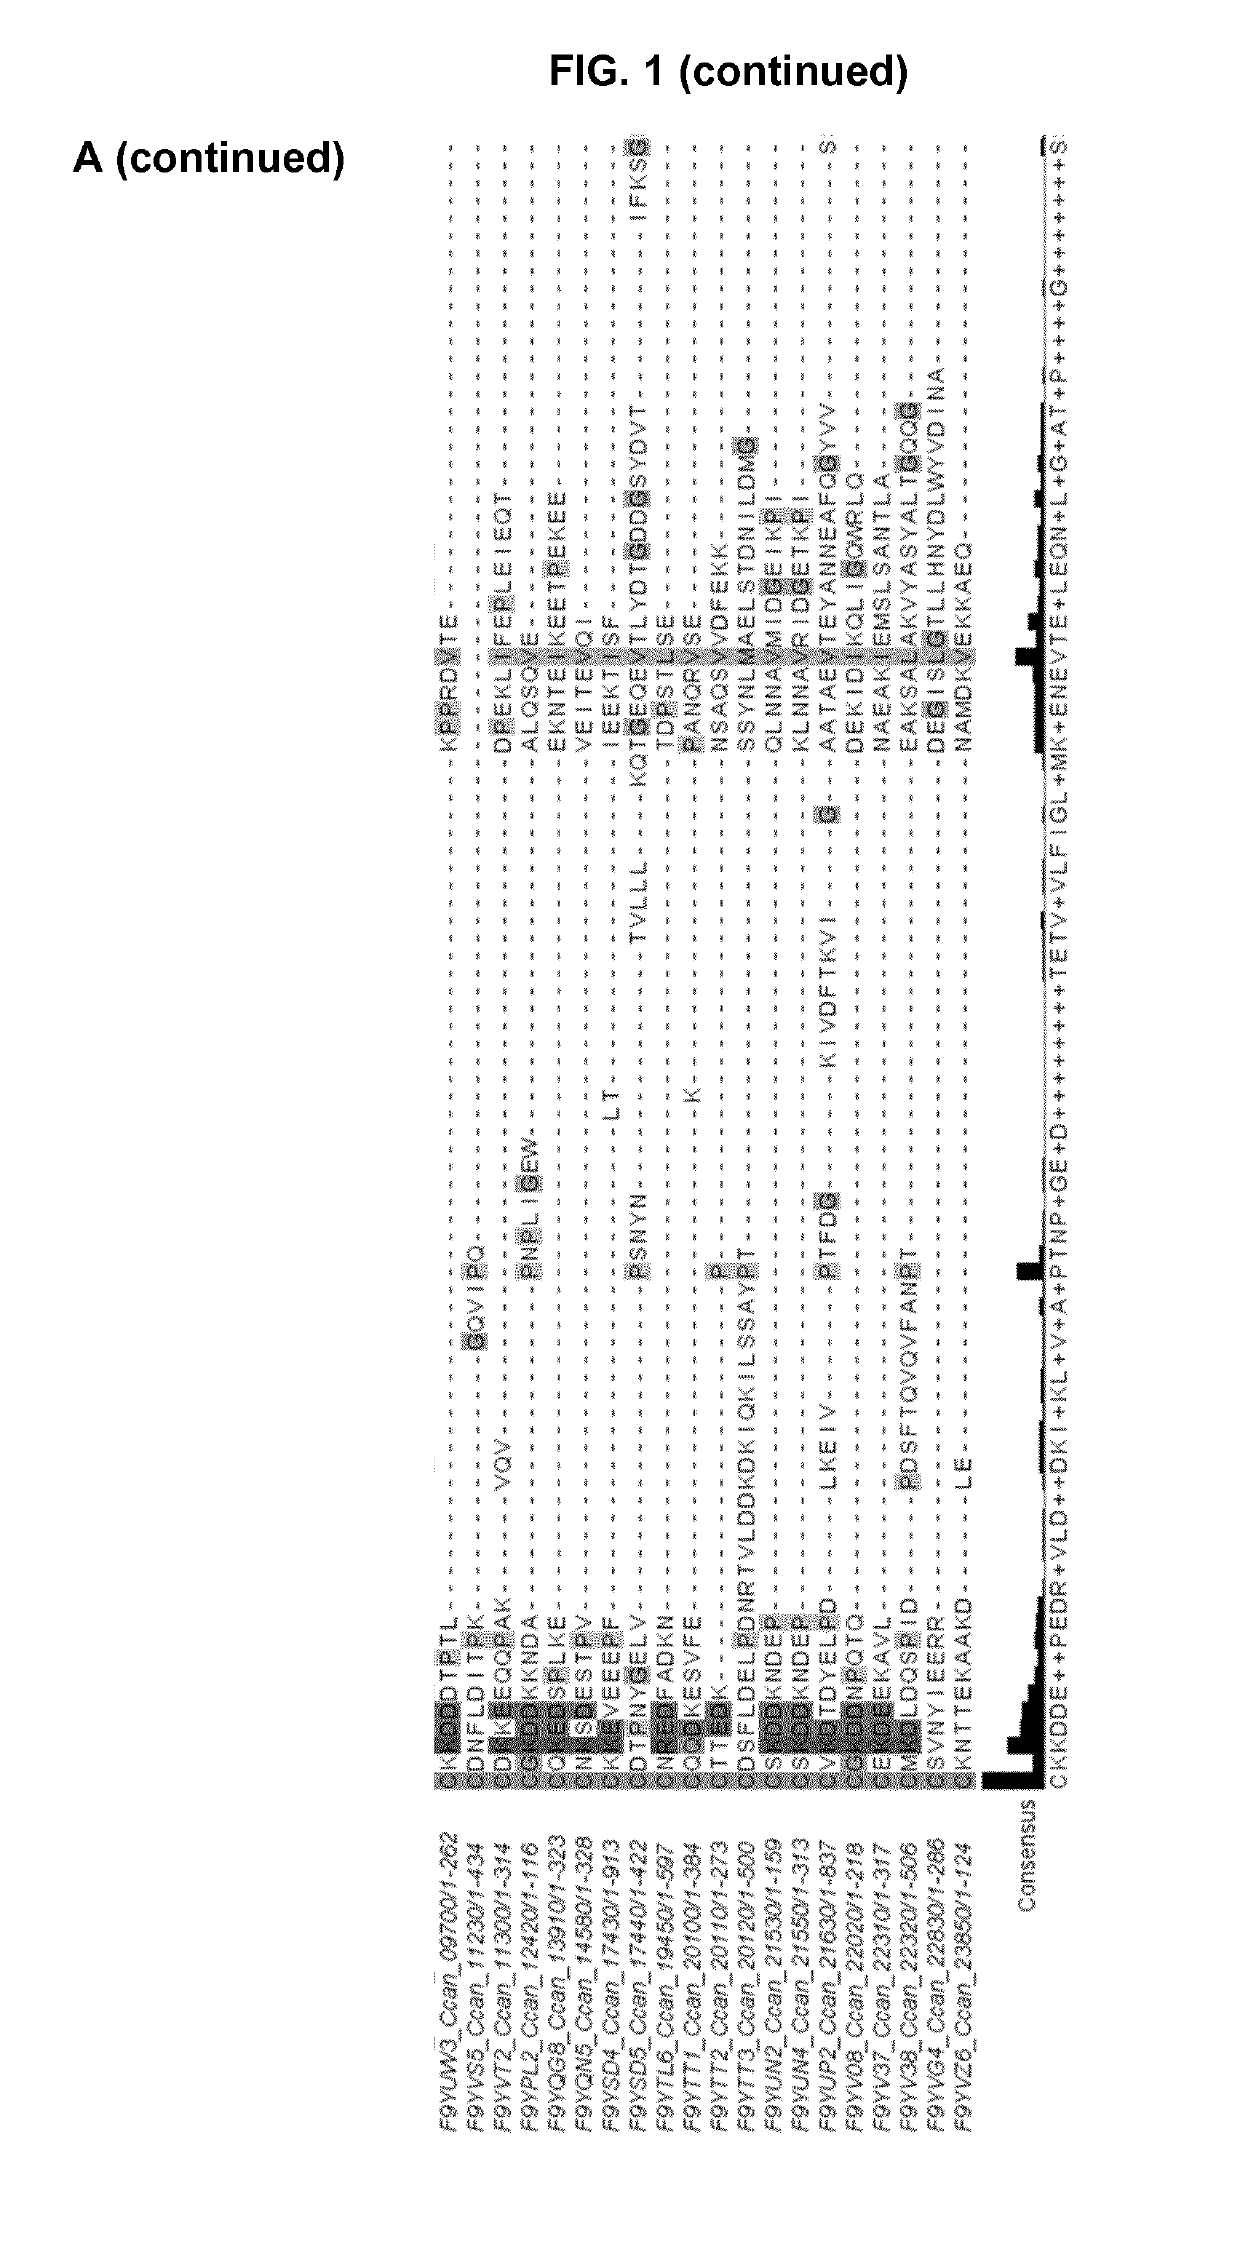 Lipoprotein export signals and uses thereof